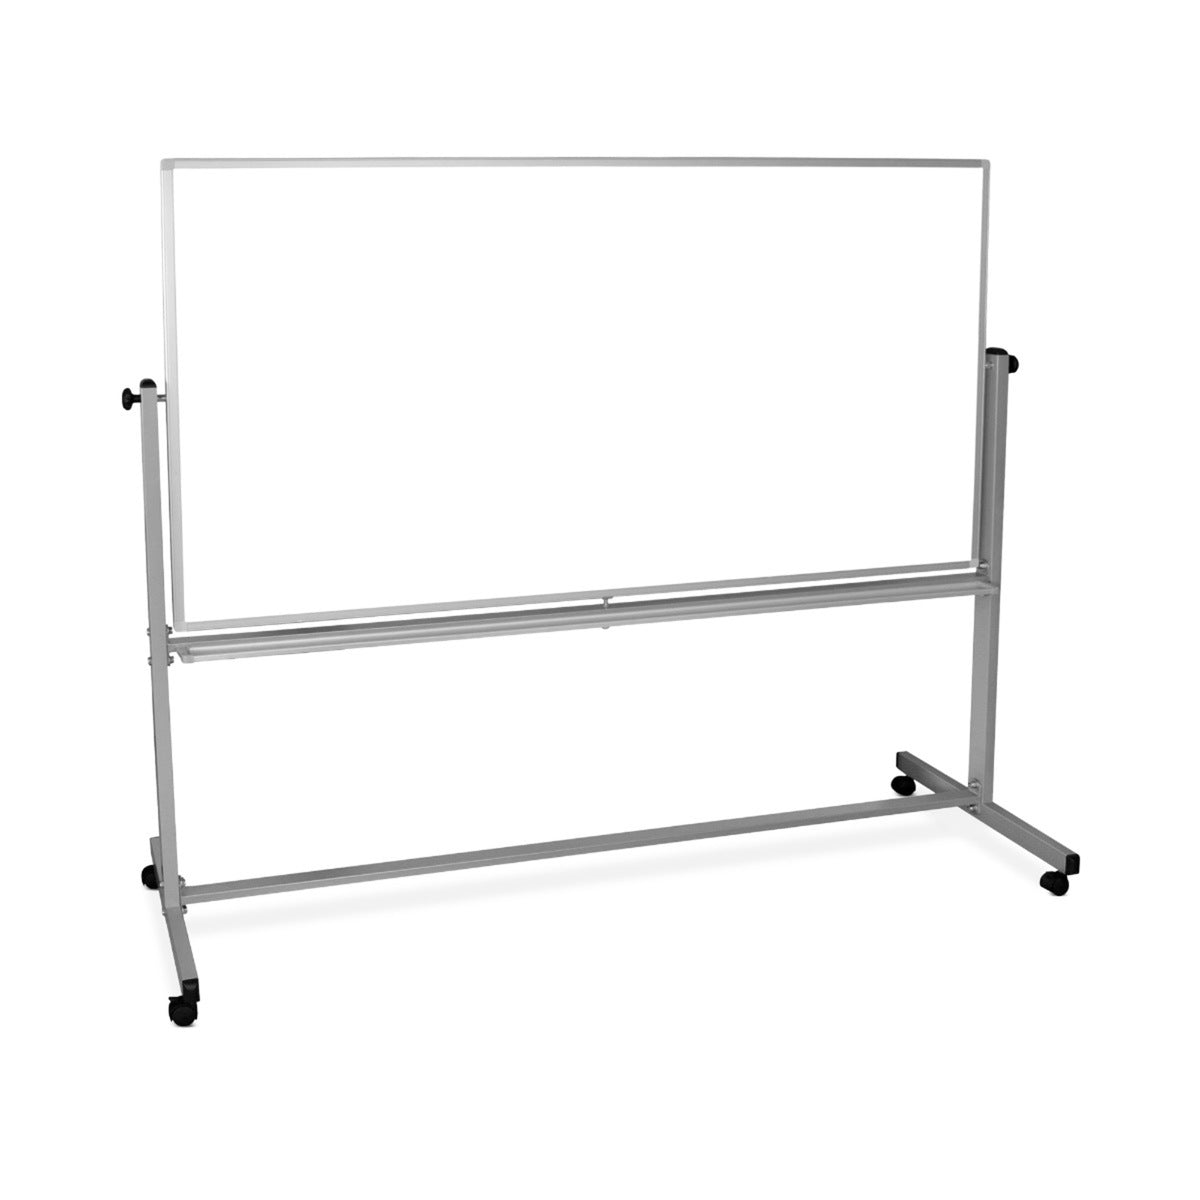 72"W x 48"H Mobile Double-Sided Magnetic Whiteboard